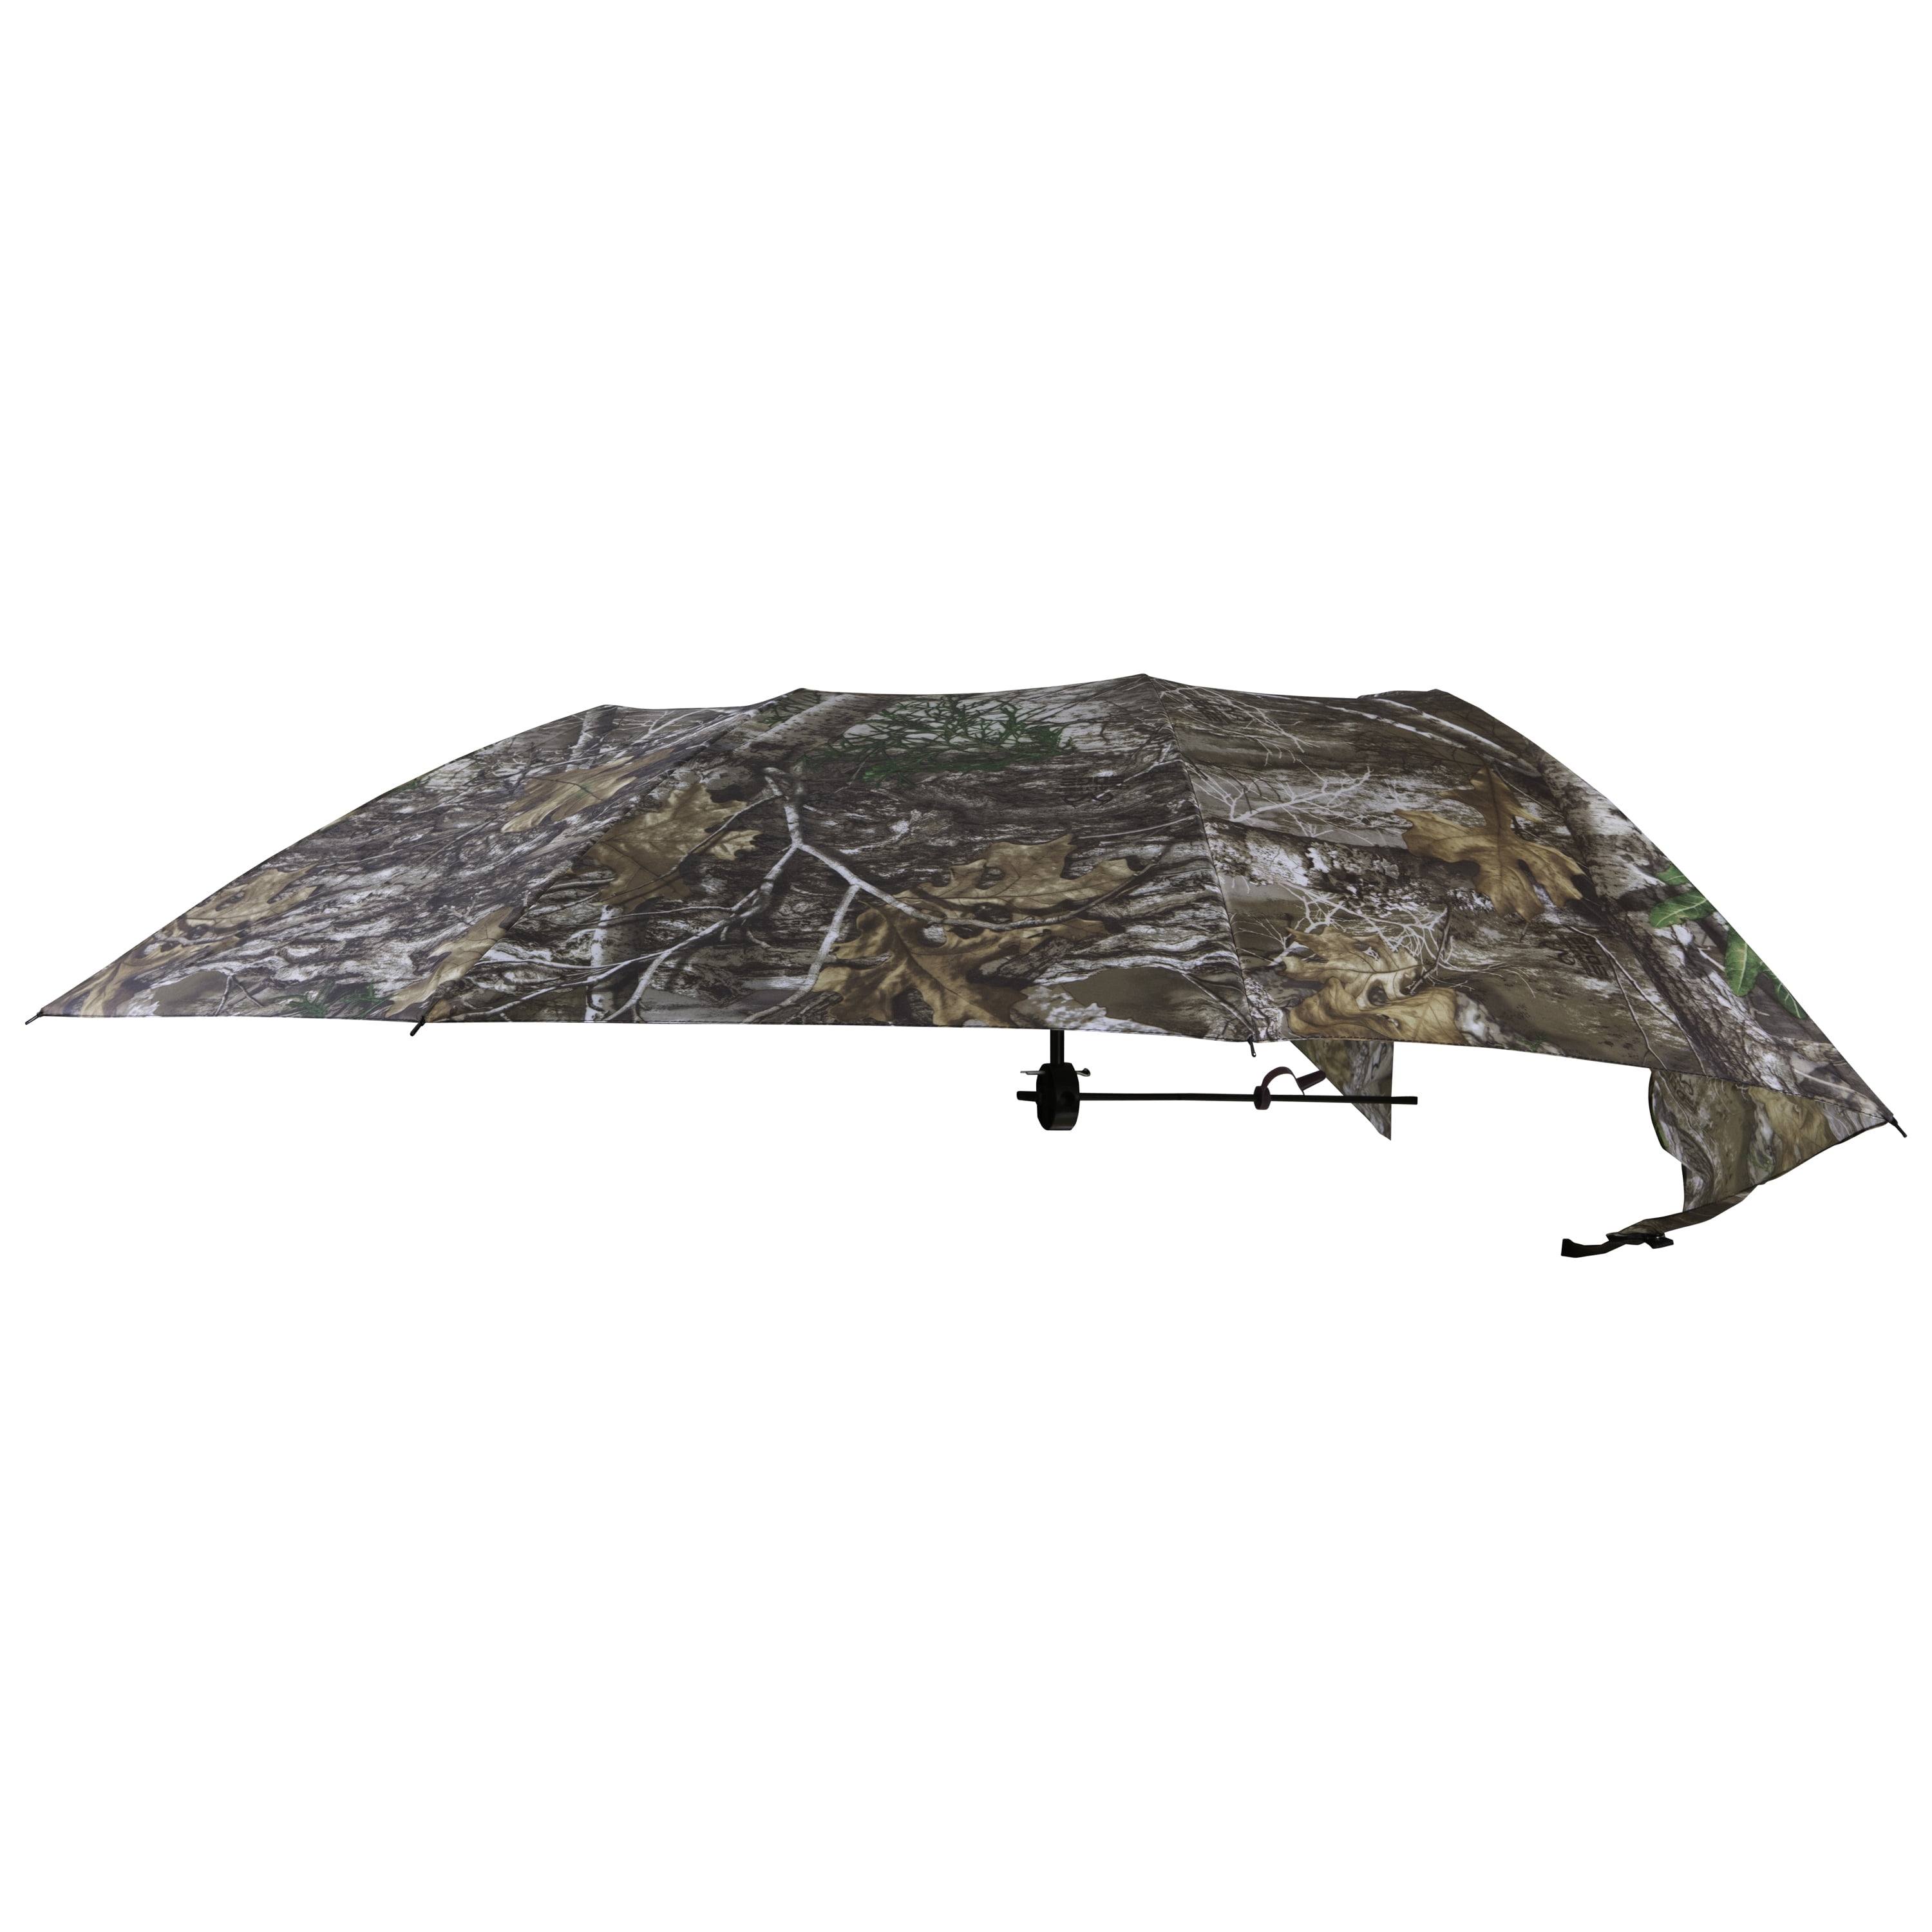 Hunters Specialties 07215 Realtree Xtra Camo Leaf Hunting Blind Treestand Net 